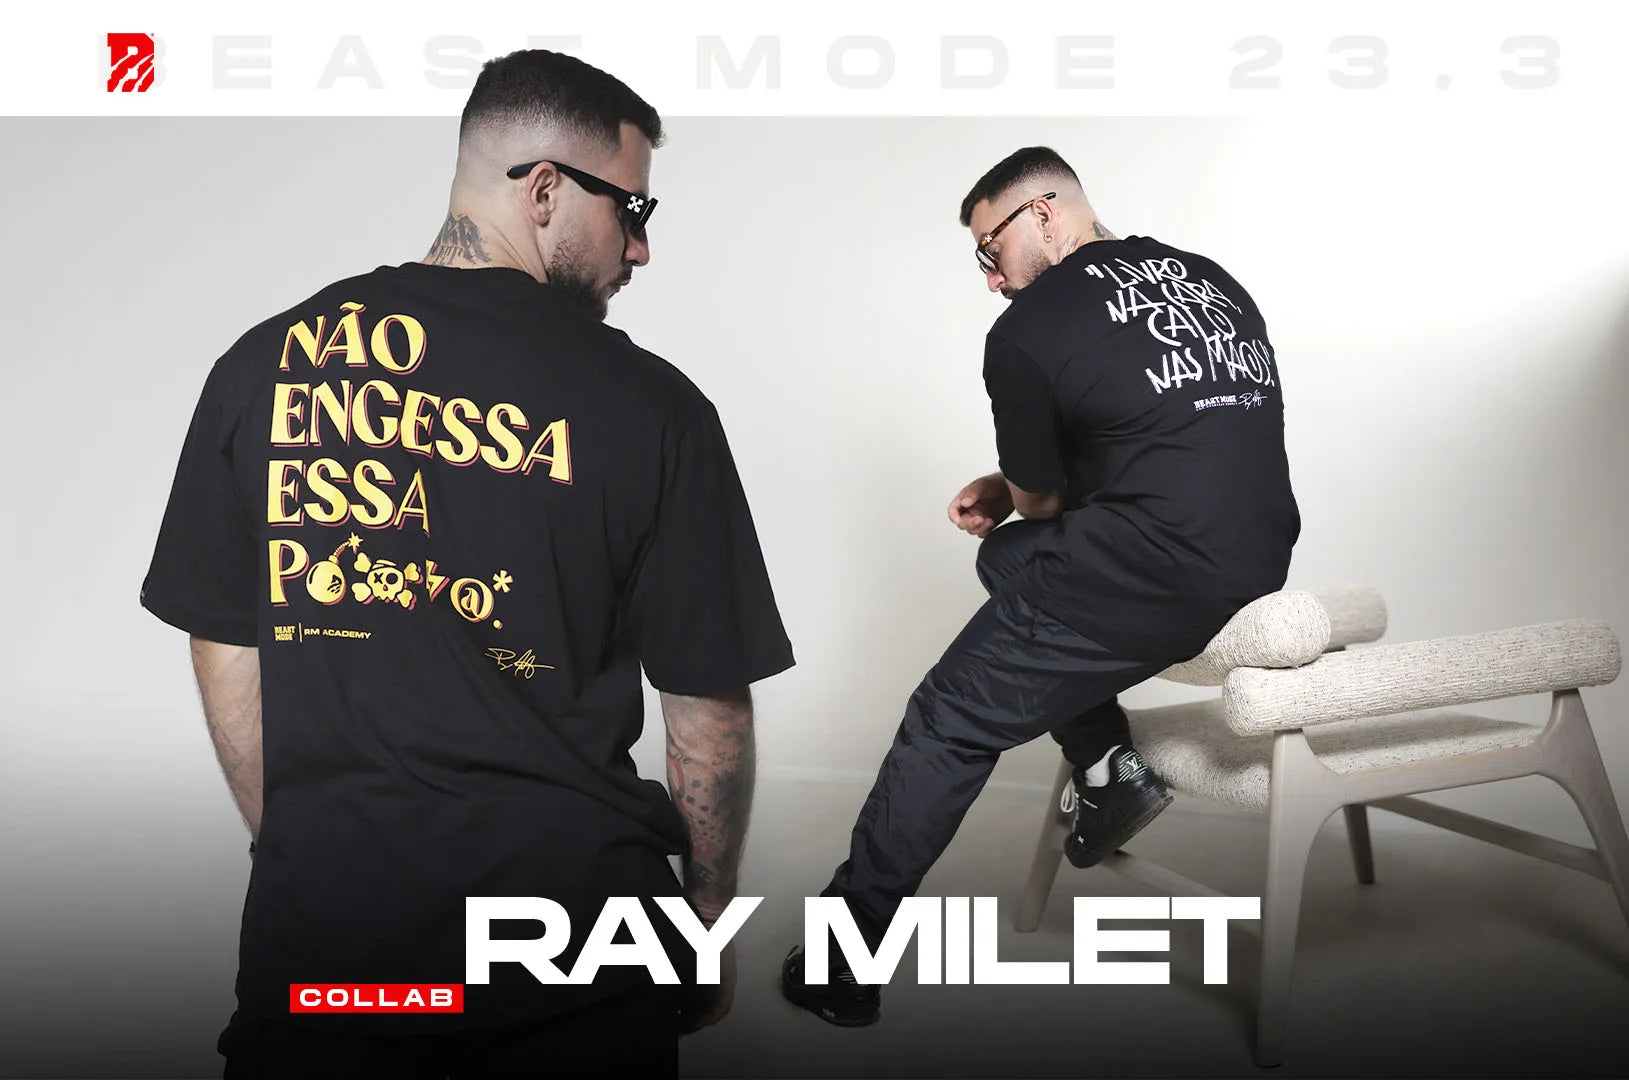 Collab Ray Milet